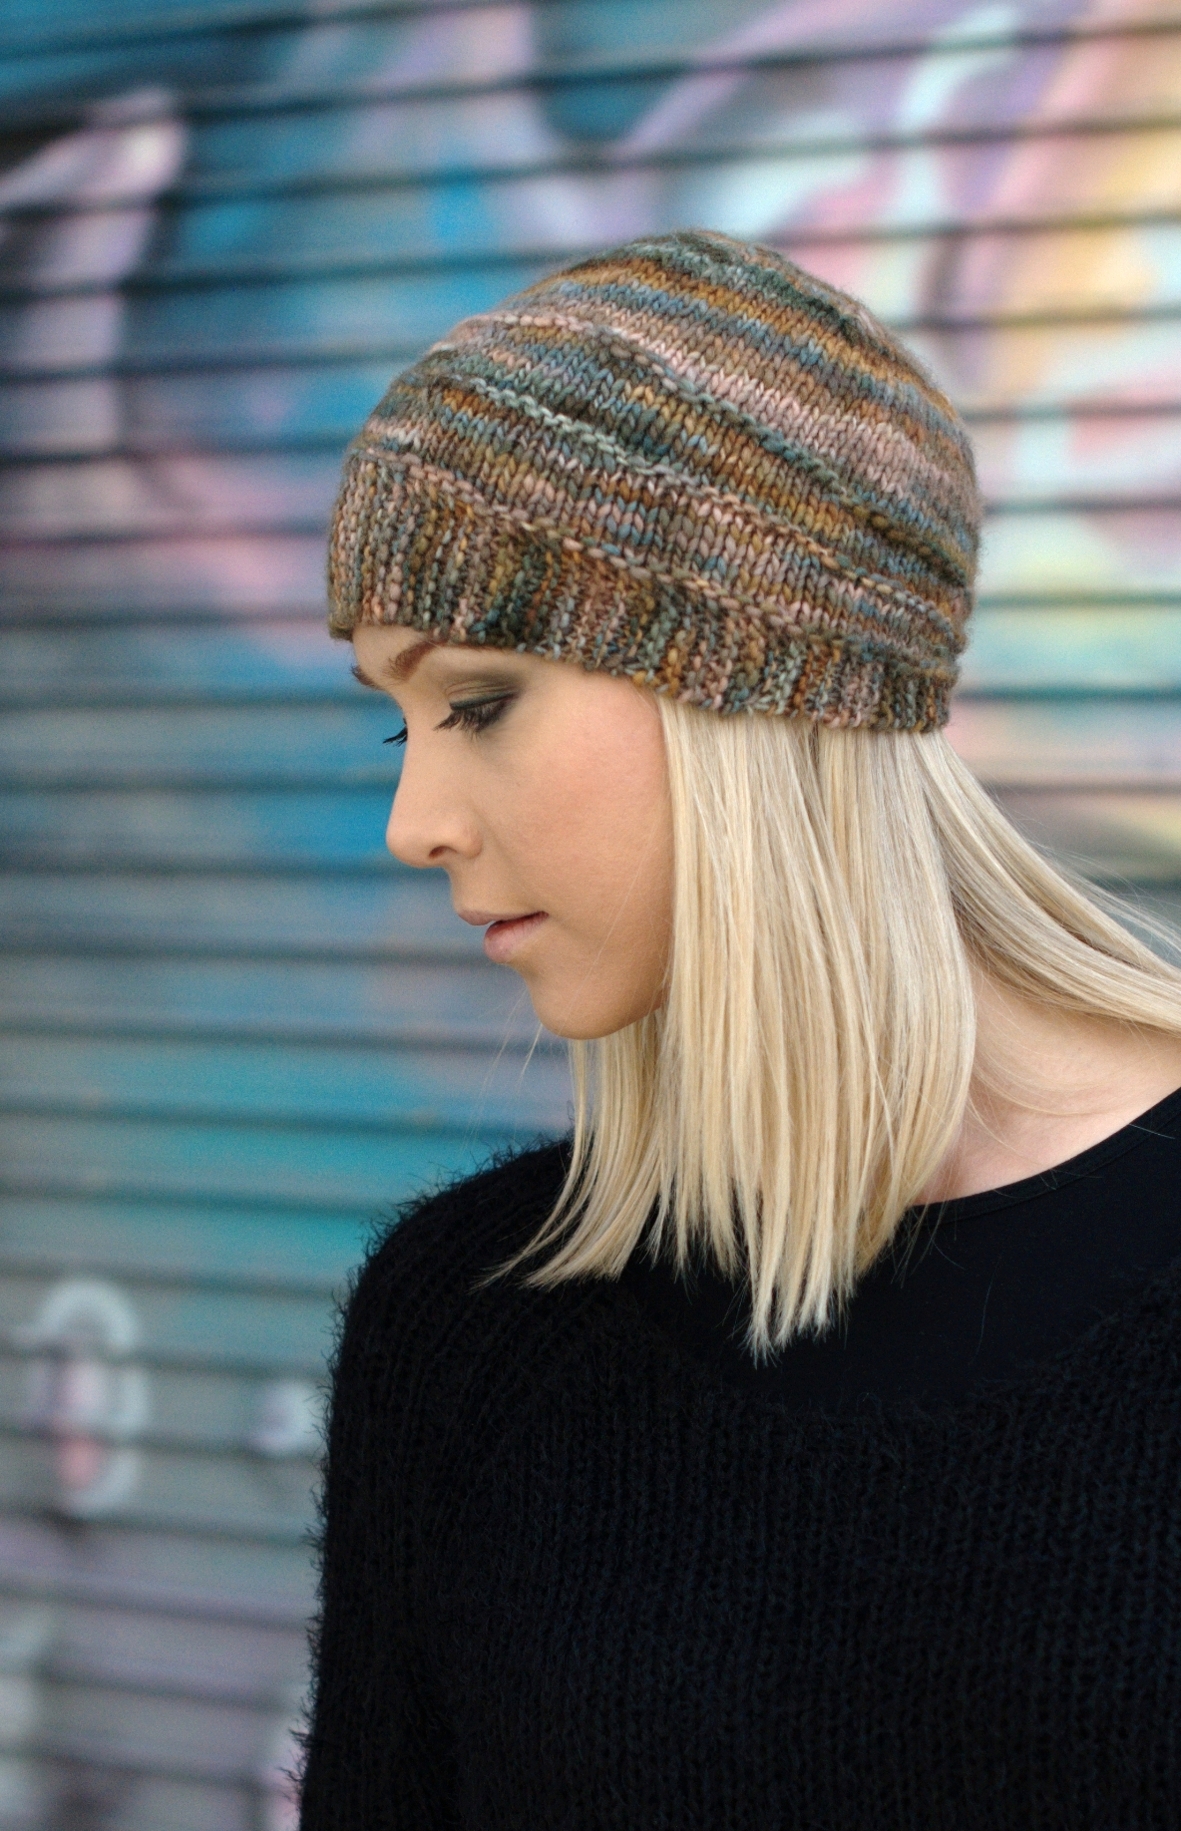 Quoin cloche Hat knitting pattern for variegated yarns